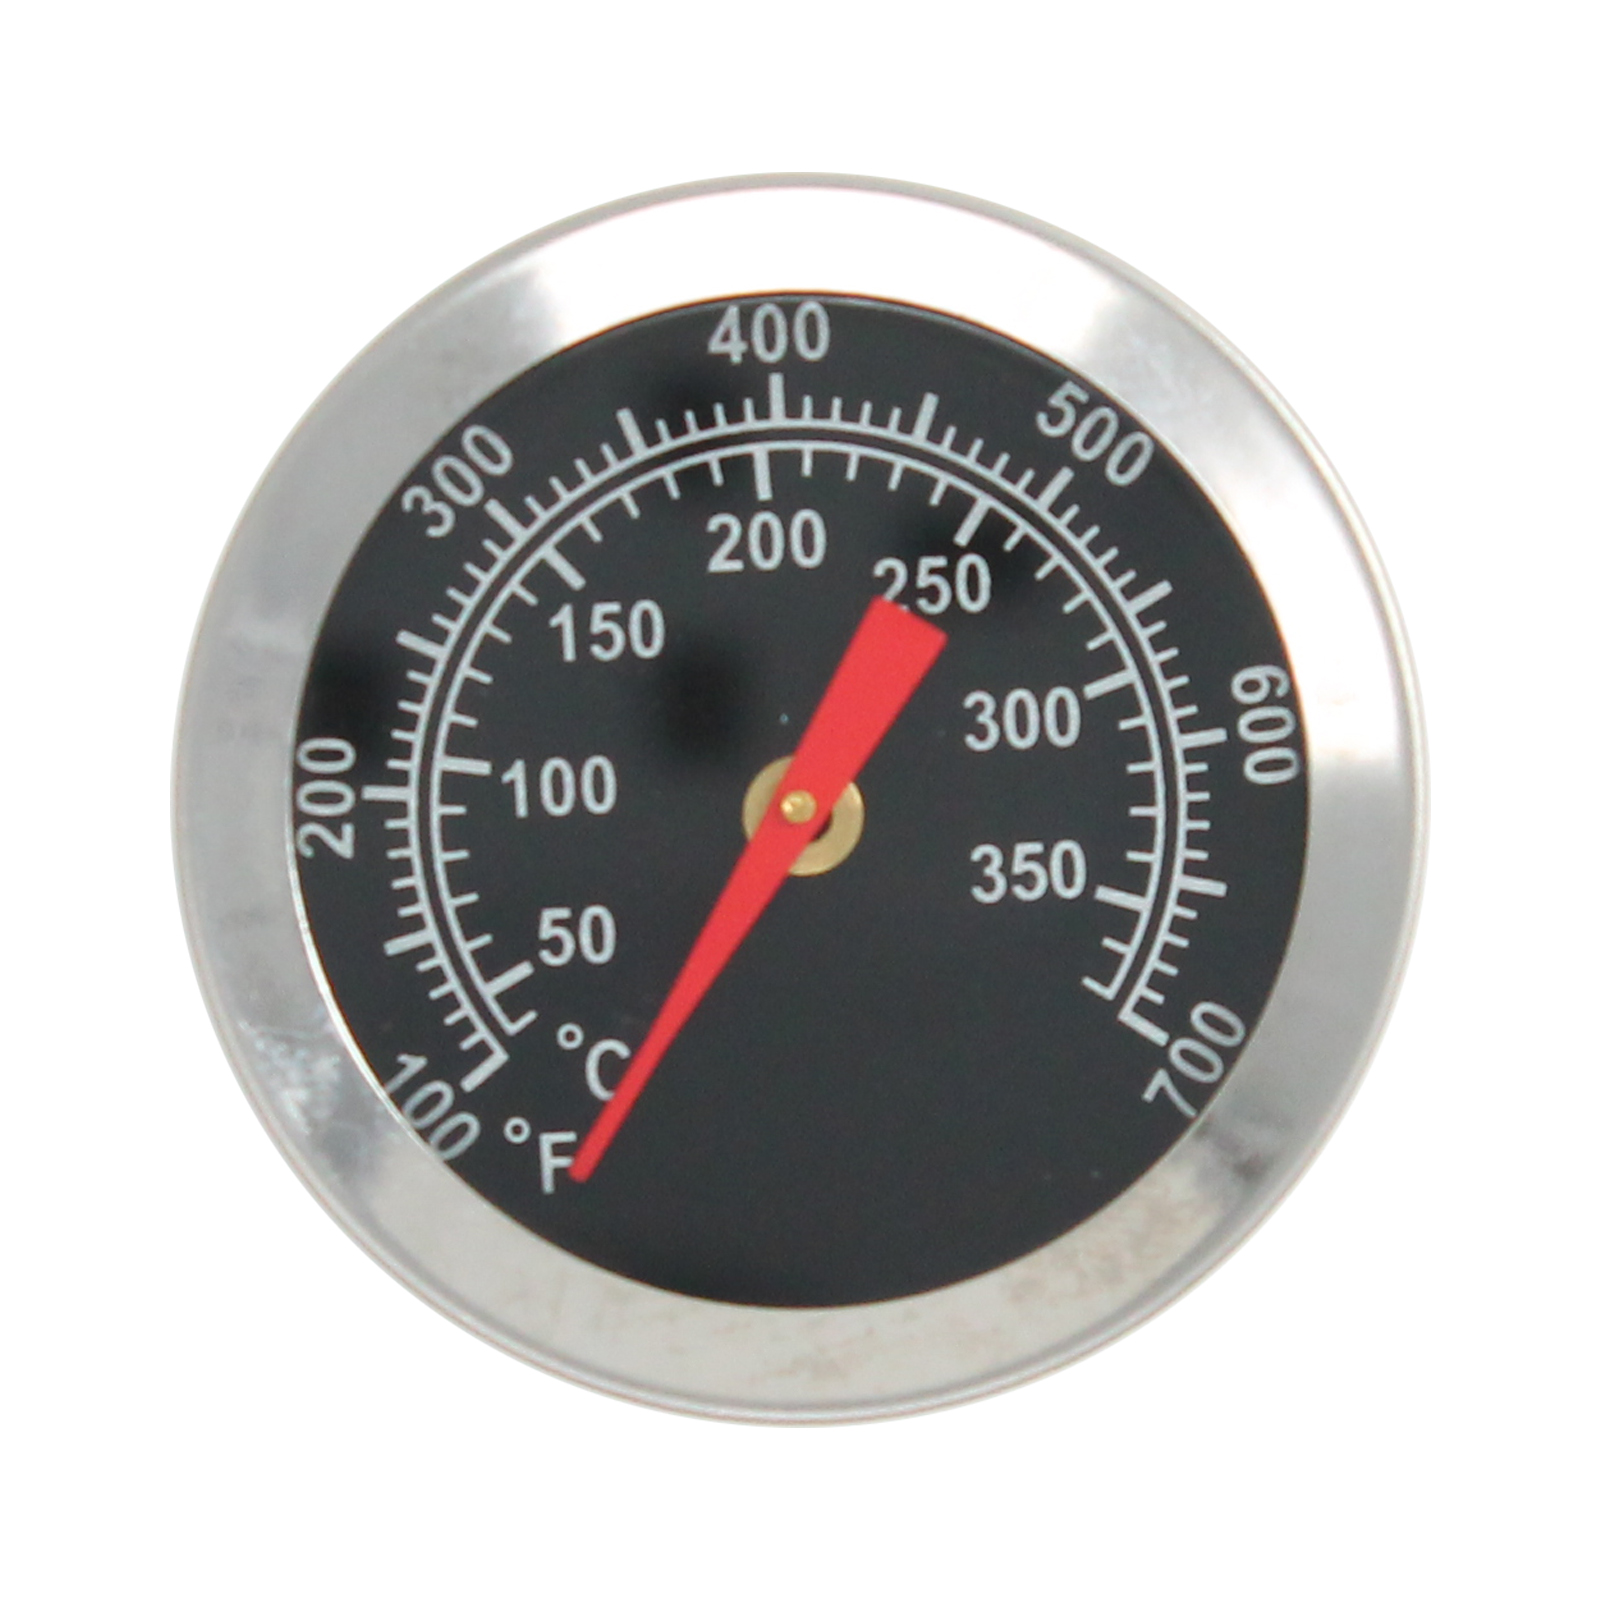 BBQ Grill Thermometer Heat Indicator Replacement Parts for Jenn Air 720-0163 - Compatible Barbeque Temperature Gauge Thermostat - image 4 of 4